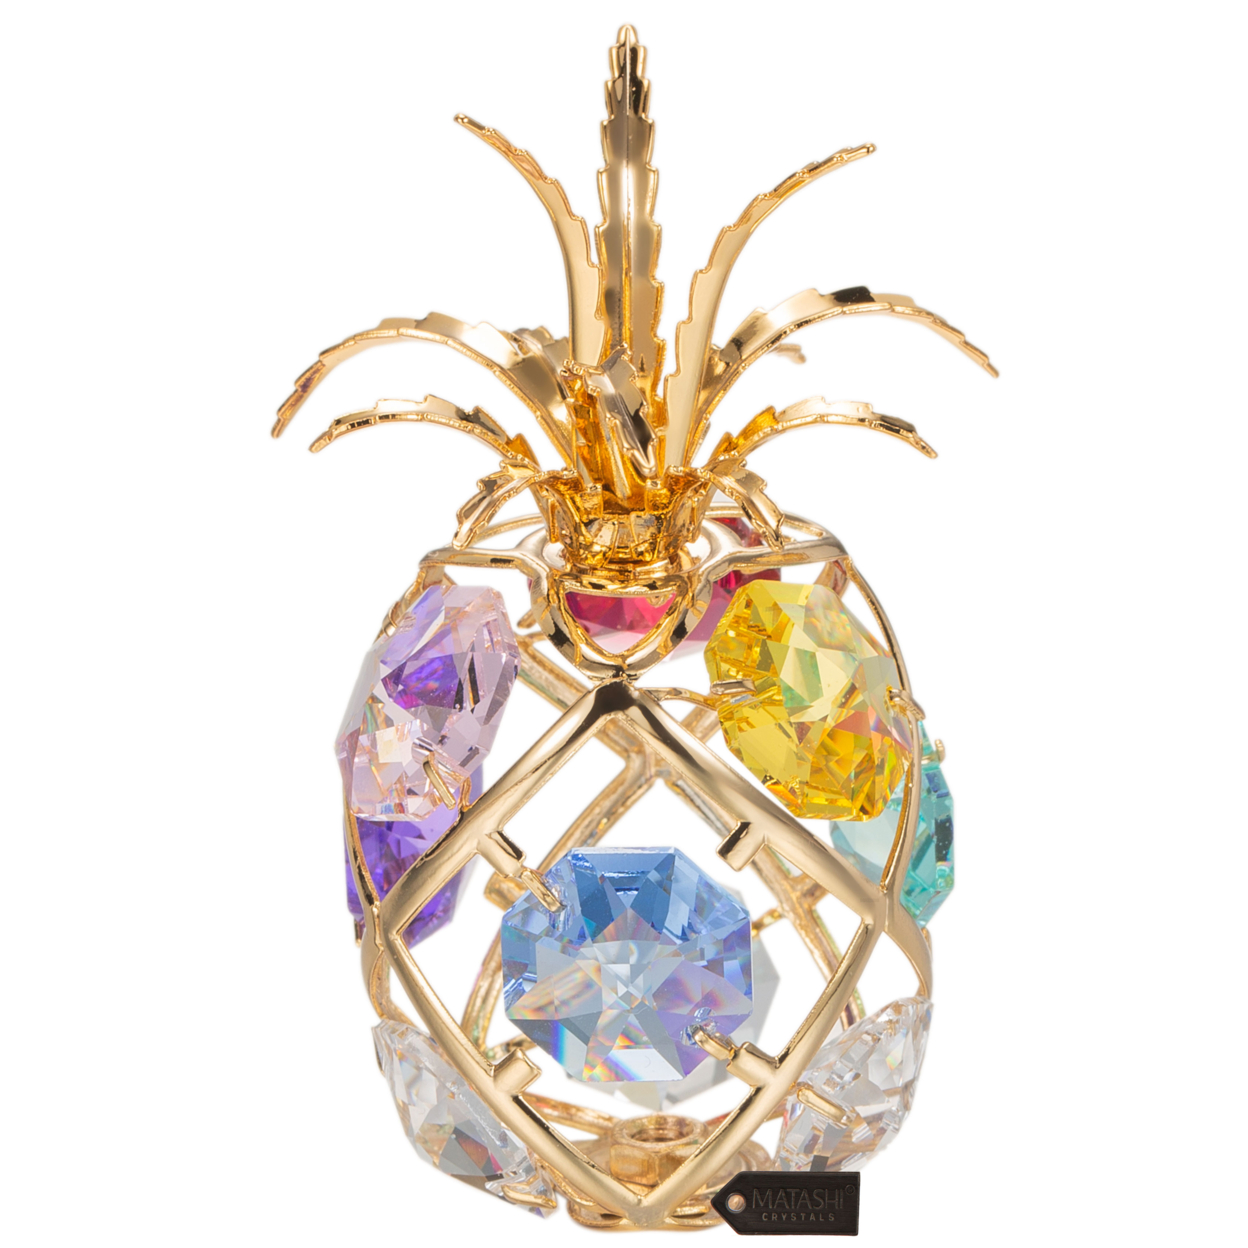 Matashi 24K Gold Plated Mini Pineapple Ornament With Colored Crystals Holiday Decor Gift For Christmas Mother's Day Birthday Anniversary